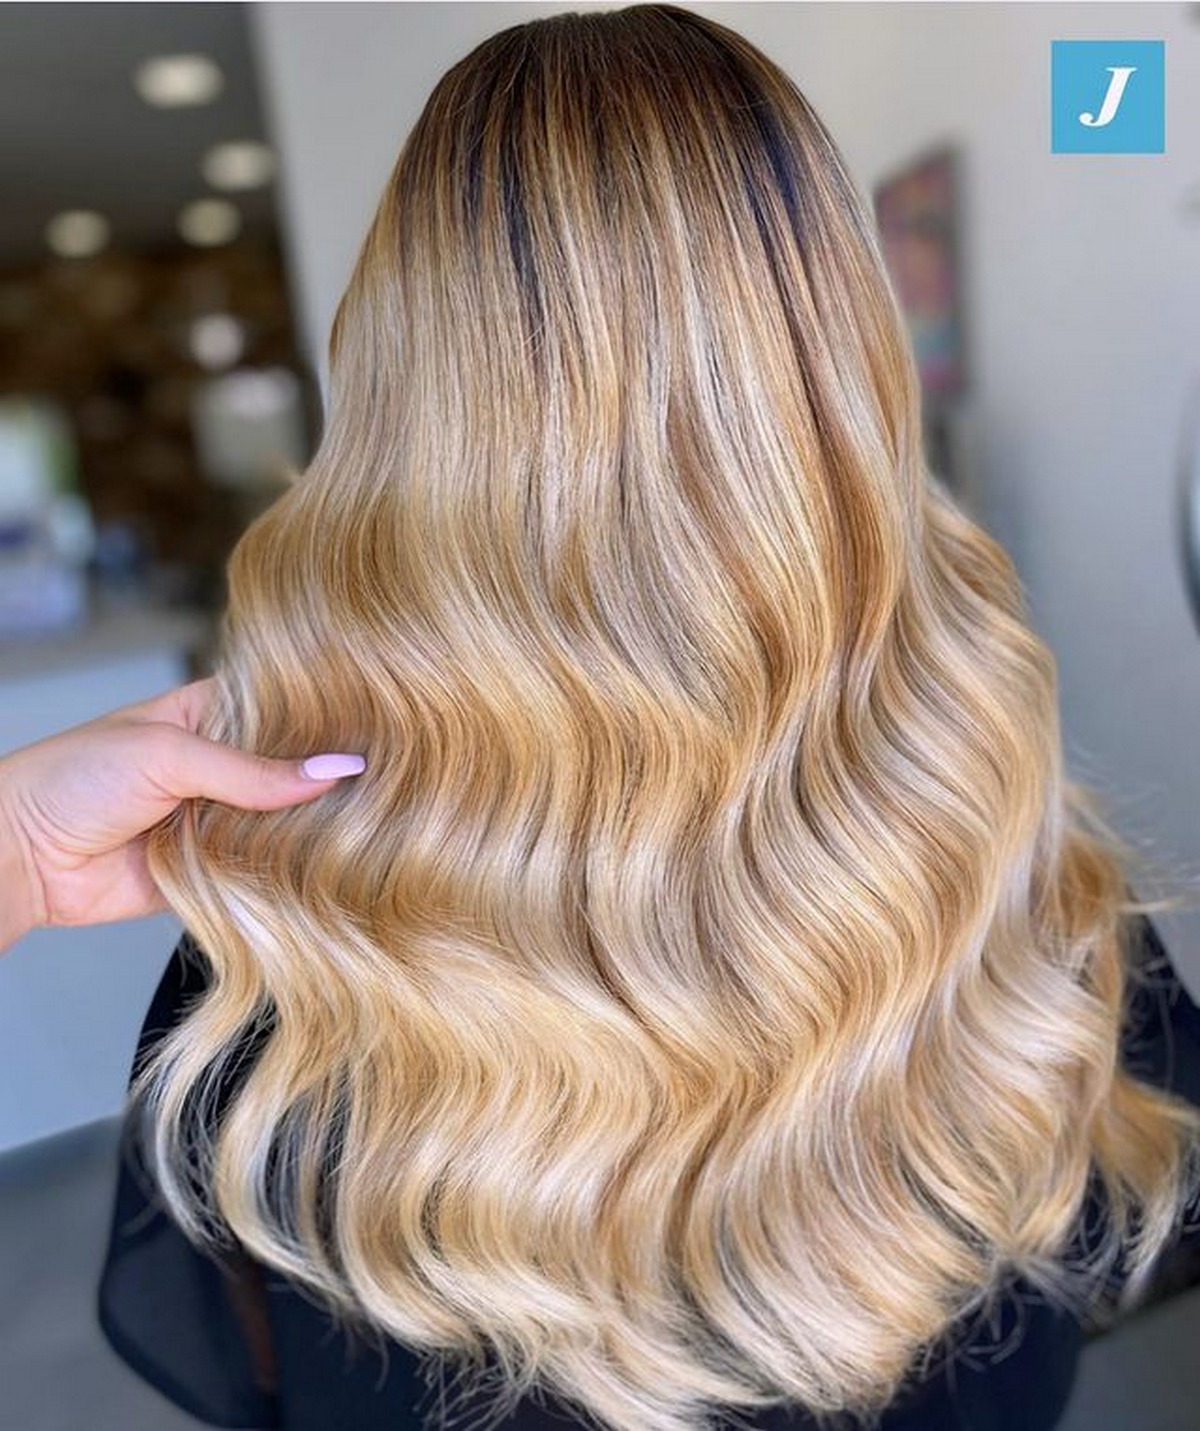 Medium-Length Wavy Blonde Hair With Shadow Roots